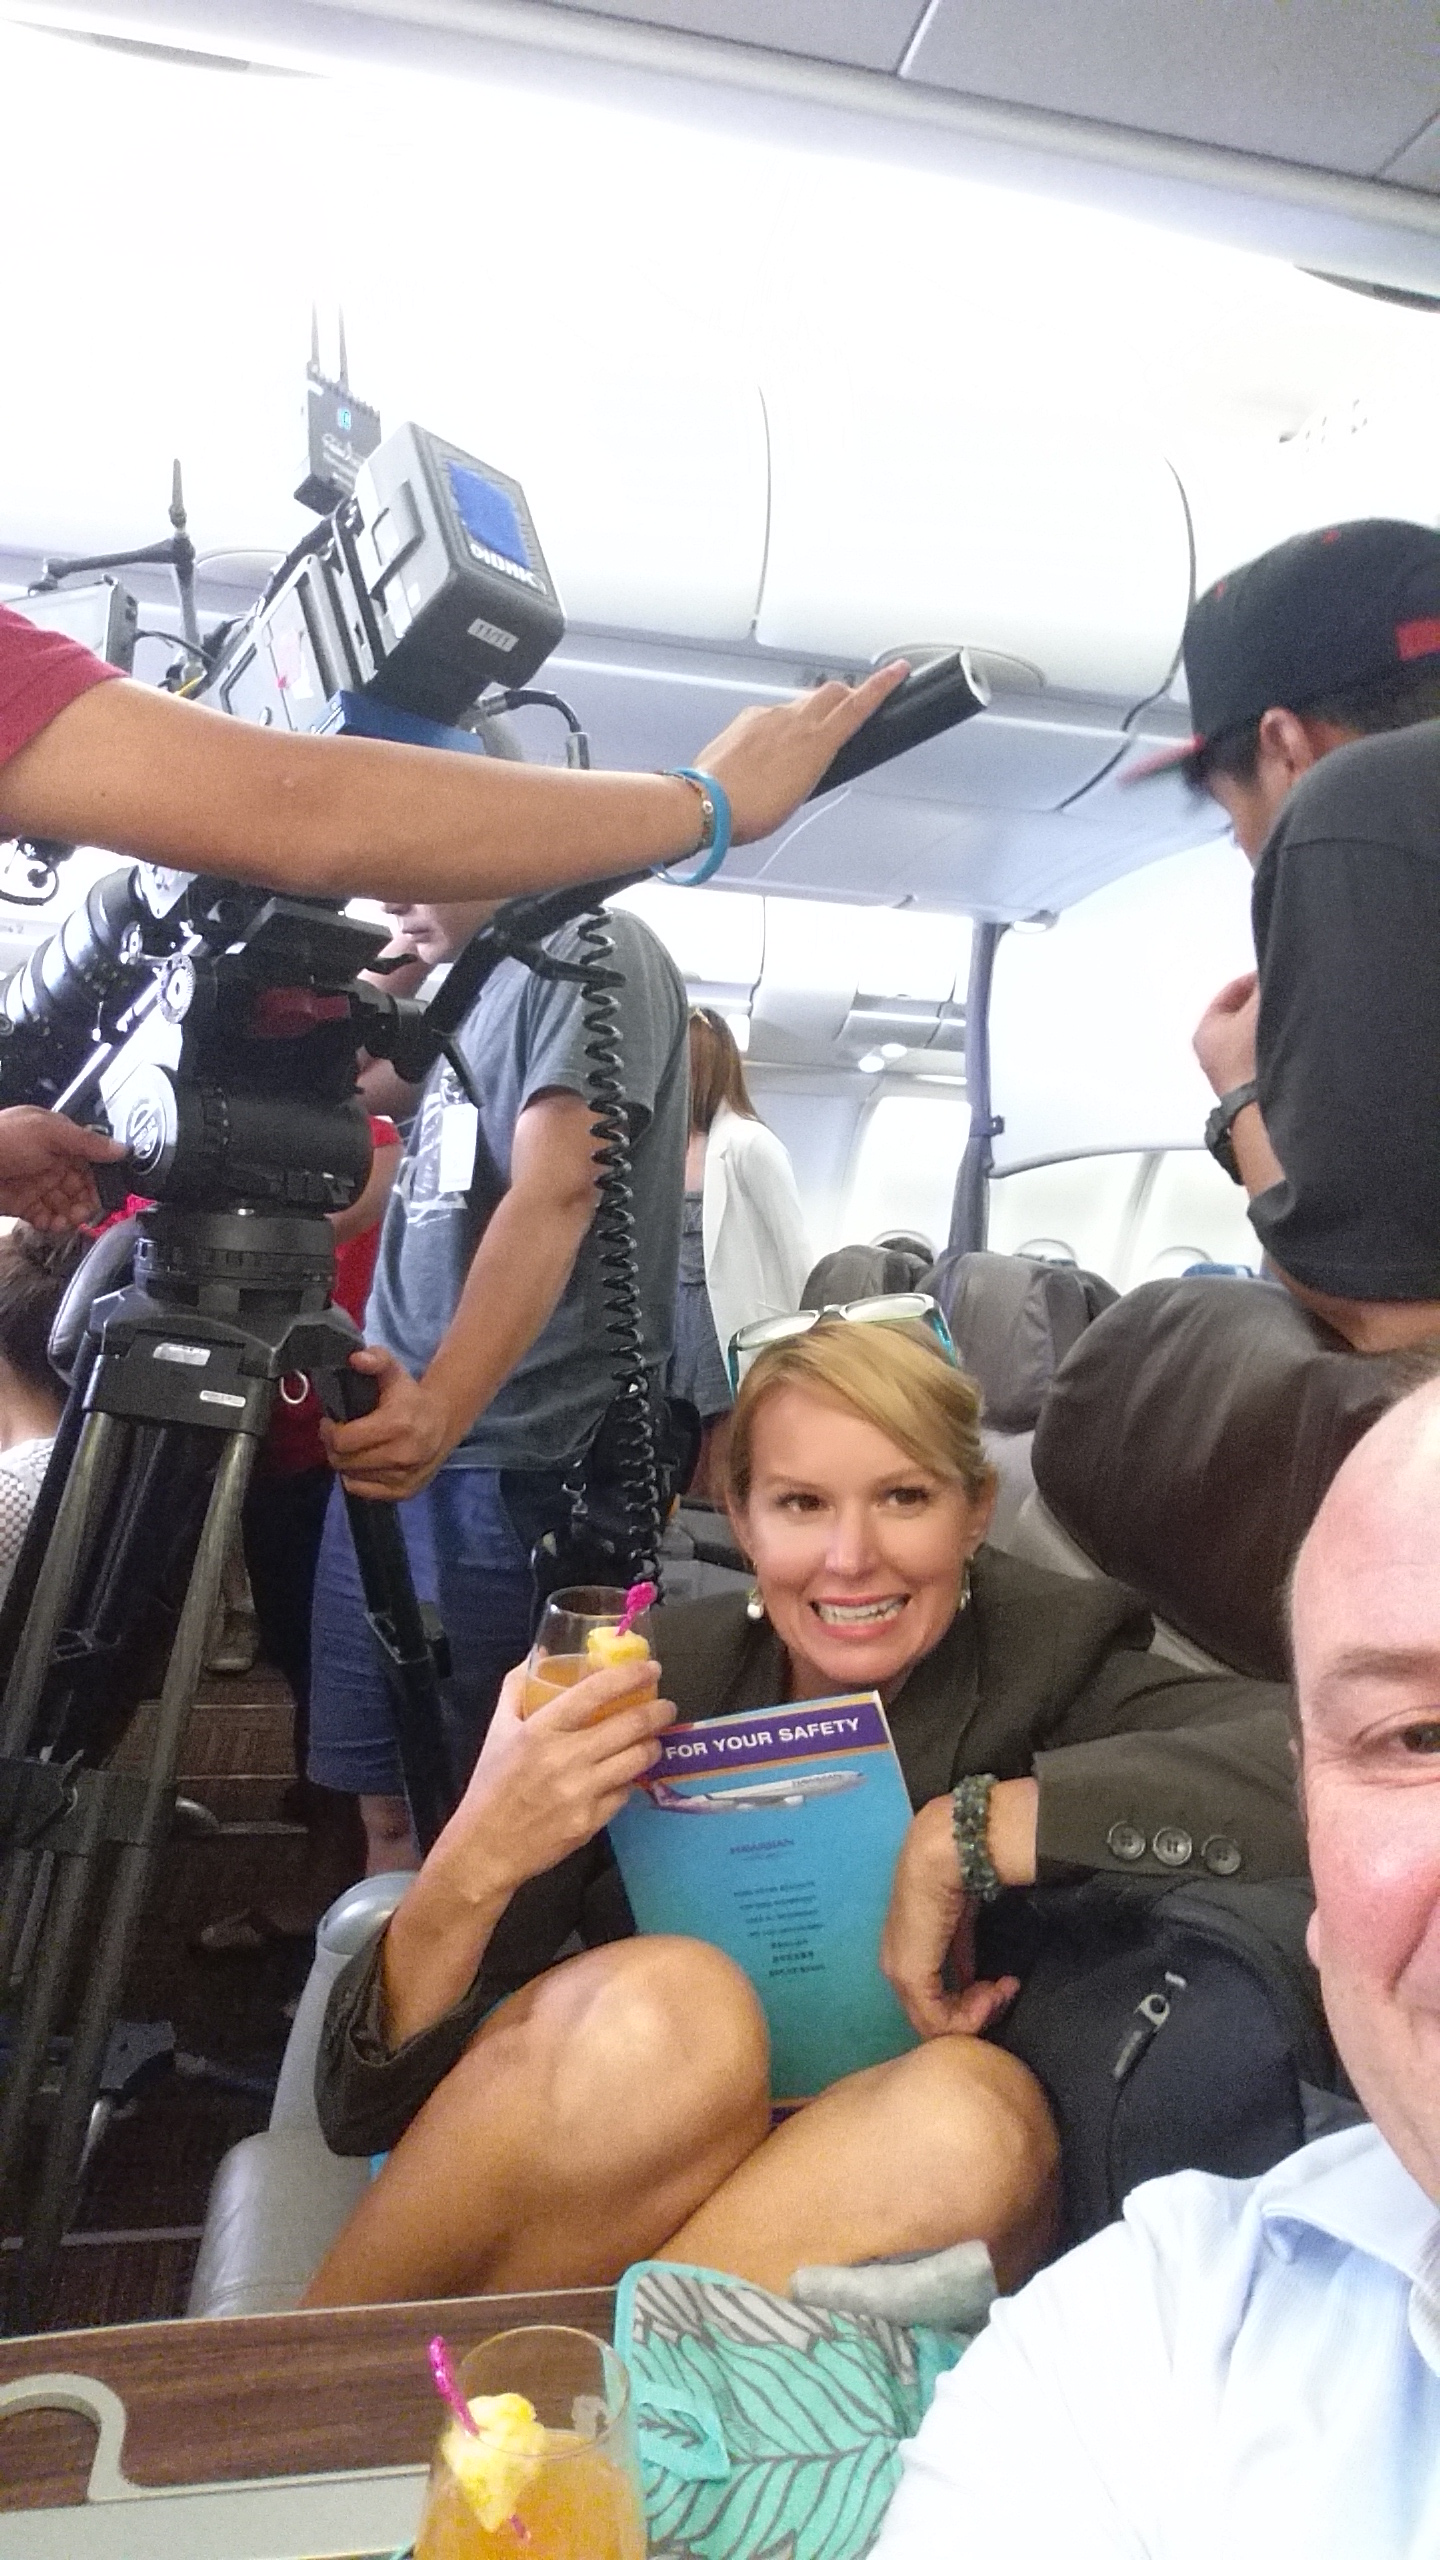 Scott M. Schewe & Angel Kay Uherek on the set of Full House, in Honolulu Hawaii Tight spaces for the cameraman, and actors on this Hawaiian Airlines plane